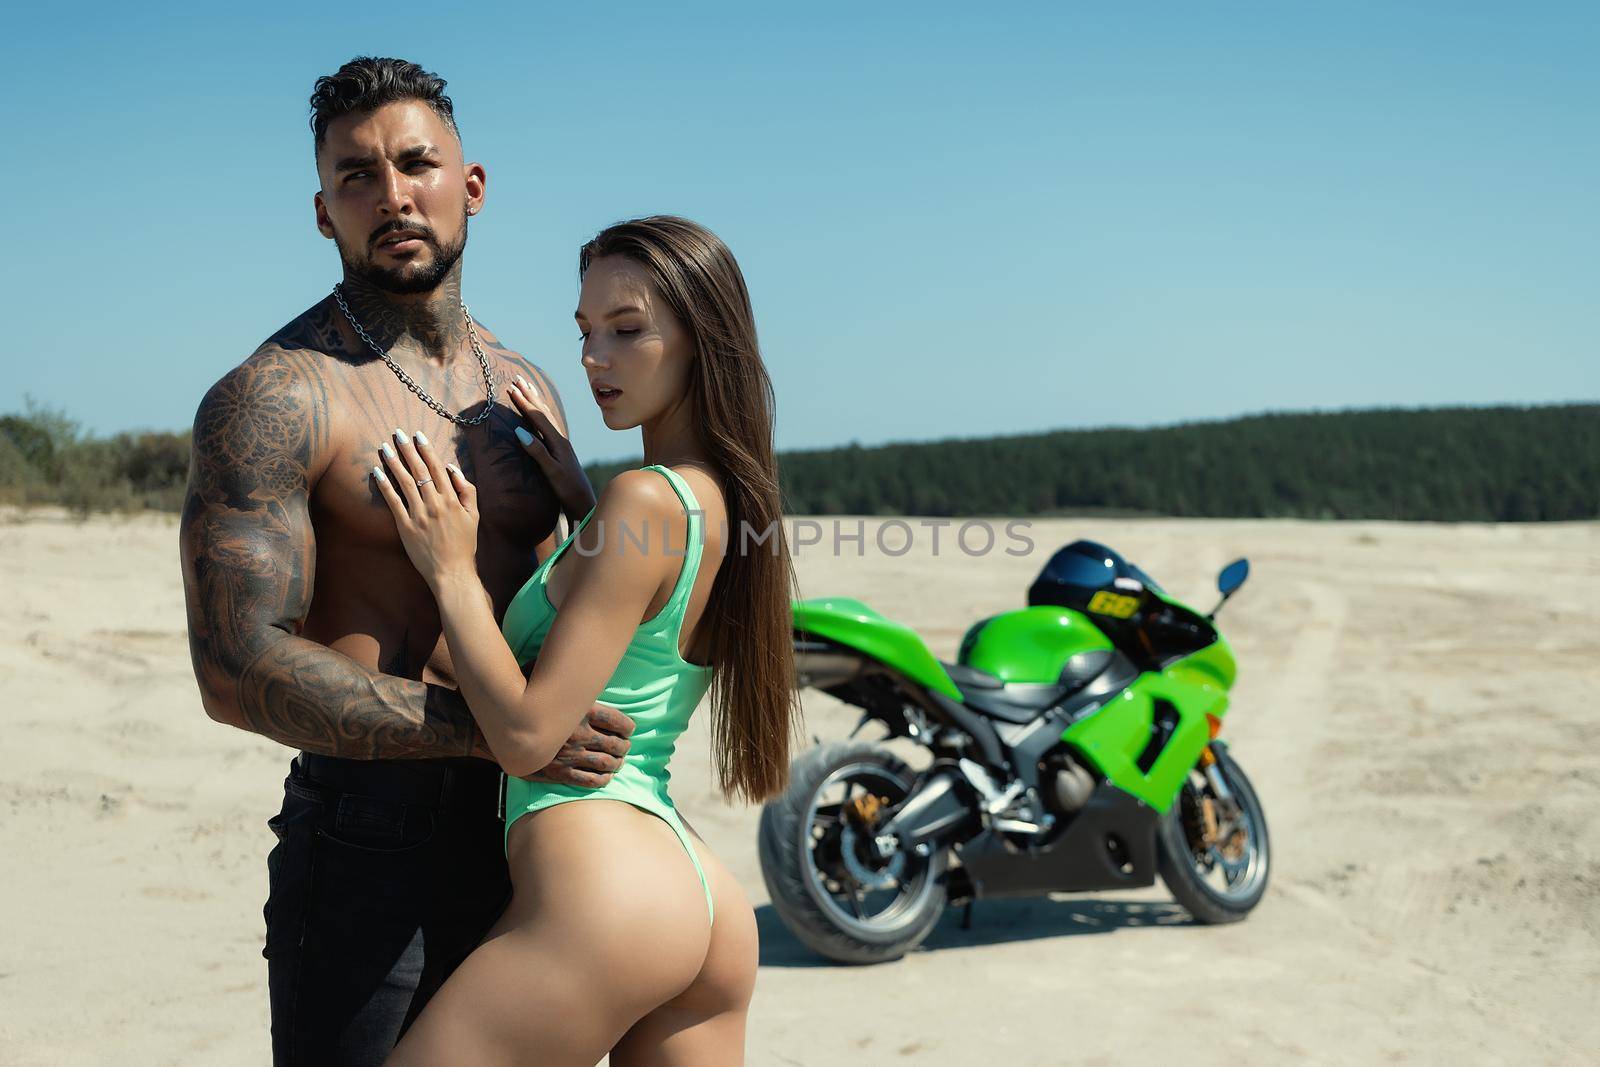 Serious male with tattoos and beard standing and embracing sensual girlfriend with long brown hair against green motorbike in sandy field in nature in sunny day